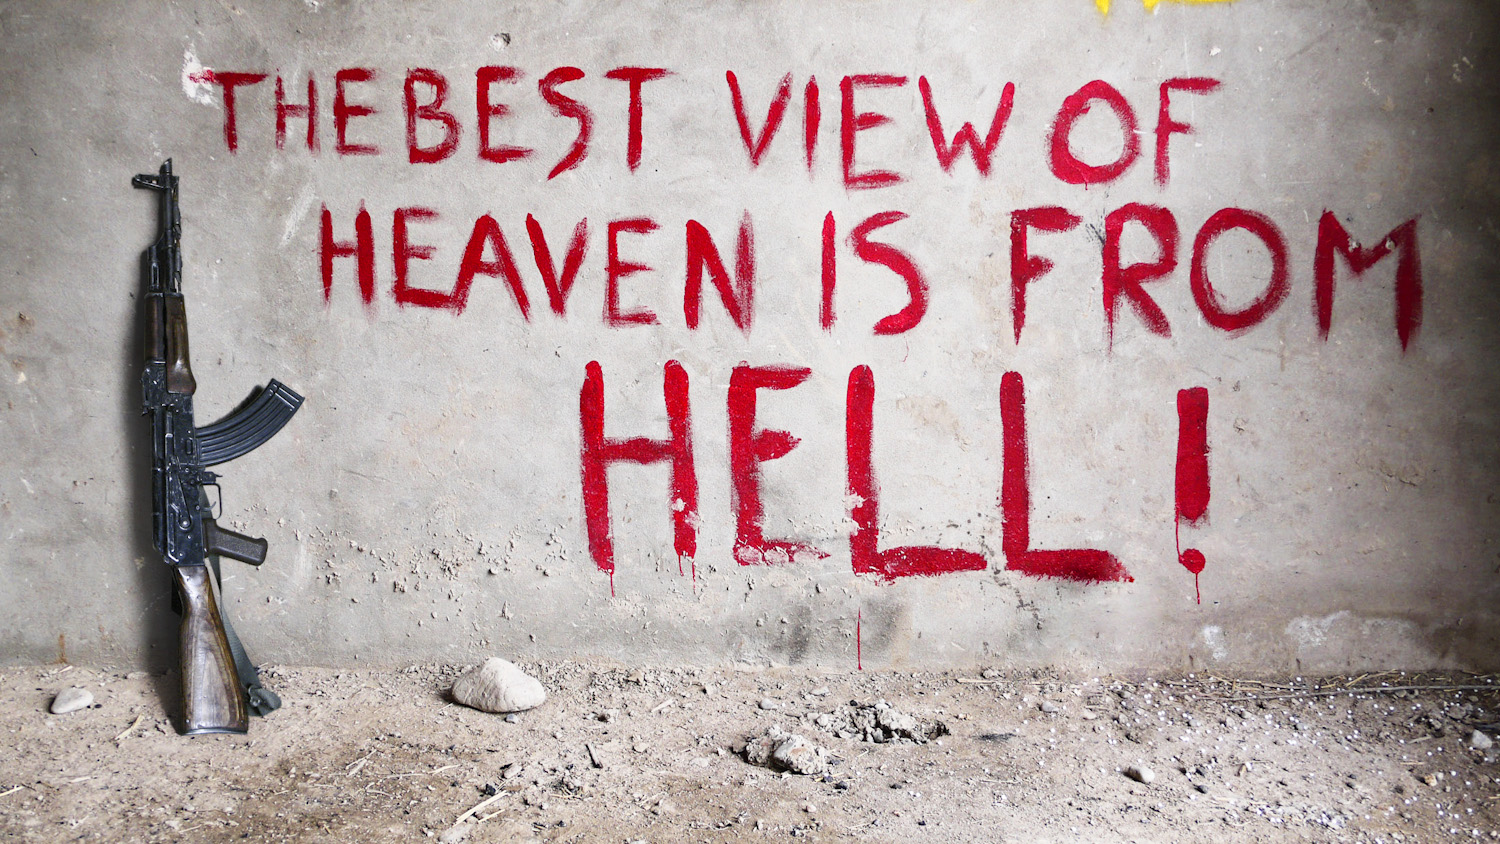 The Best View Of Heaven Is From Hell exhibits at Idea Generation Gallery from January 28 – February 20 by Artist Bran